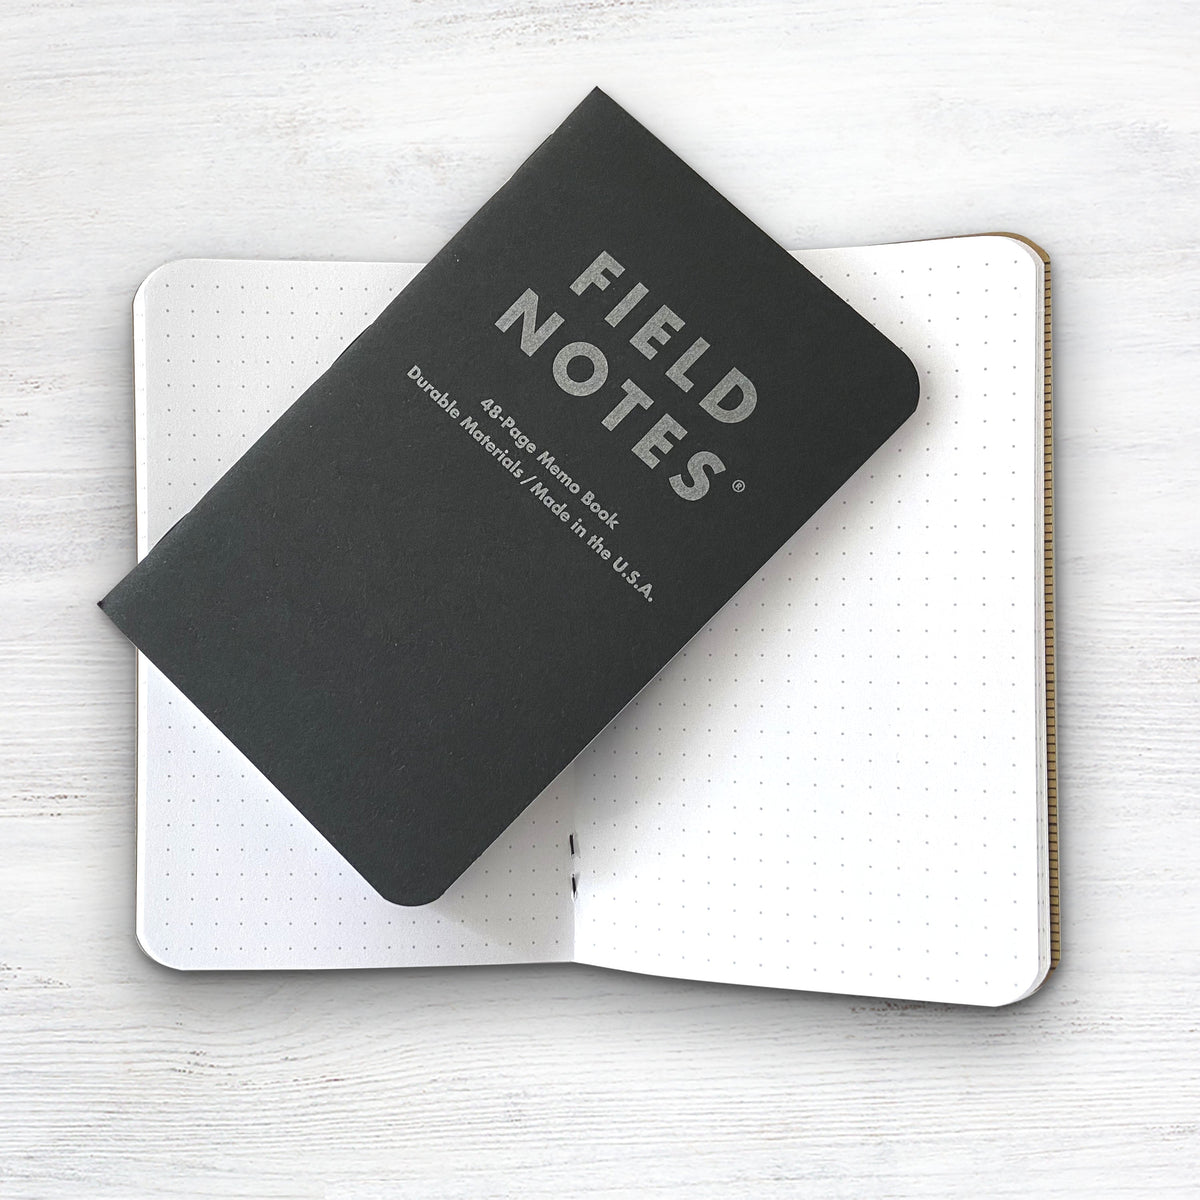 Field Notes Pitch Black Dot-Graph Memo Book 3-Pack